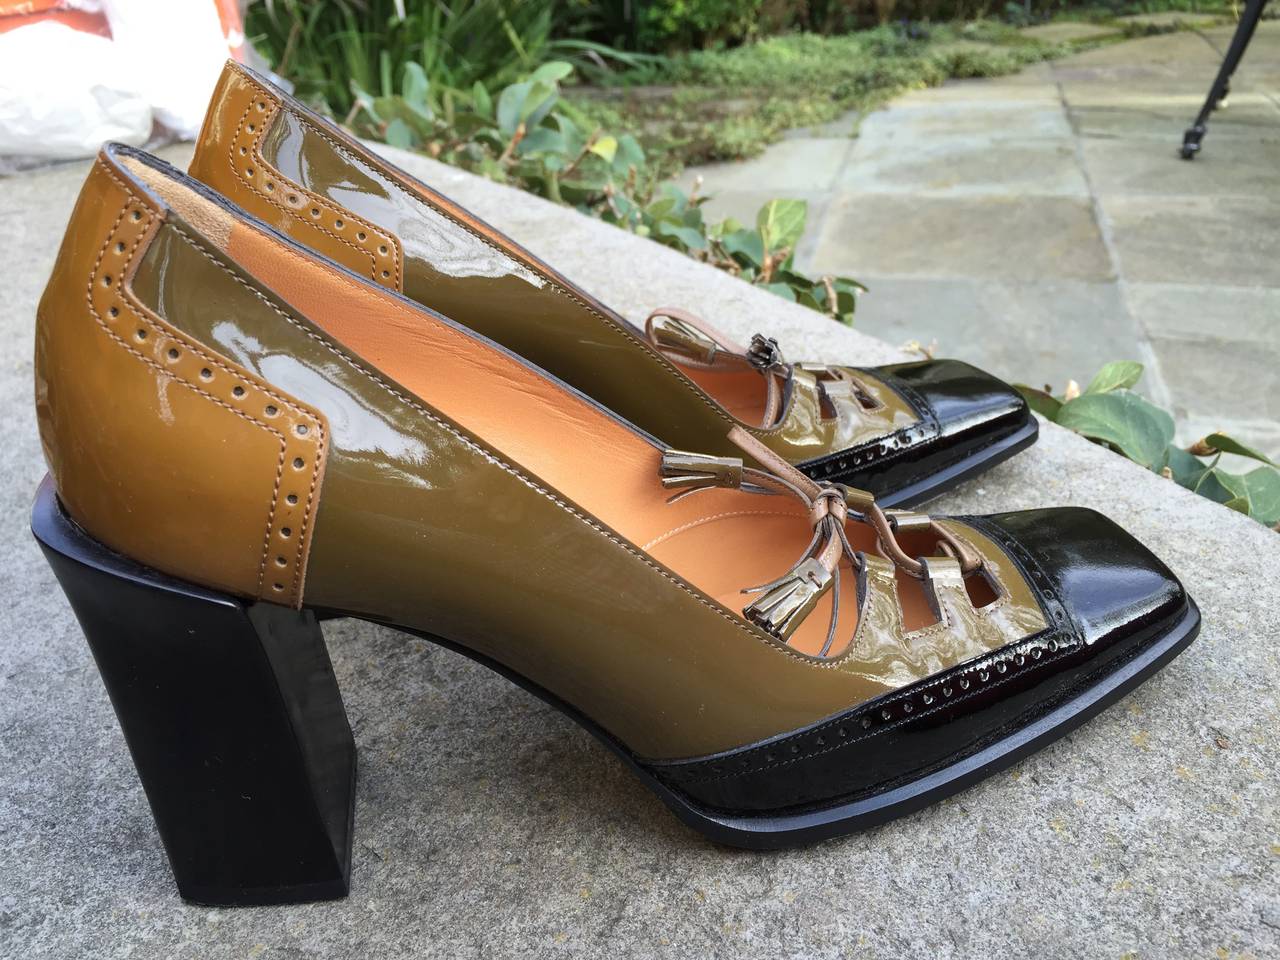 Hermes fun and funky patent leather pumps with a chinky heel.
Sz 38 1/2